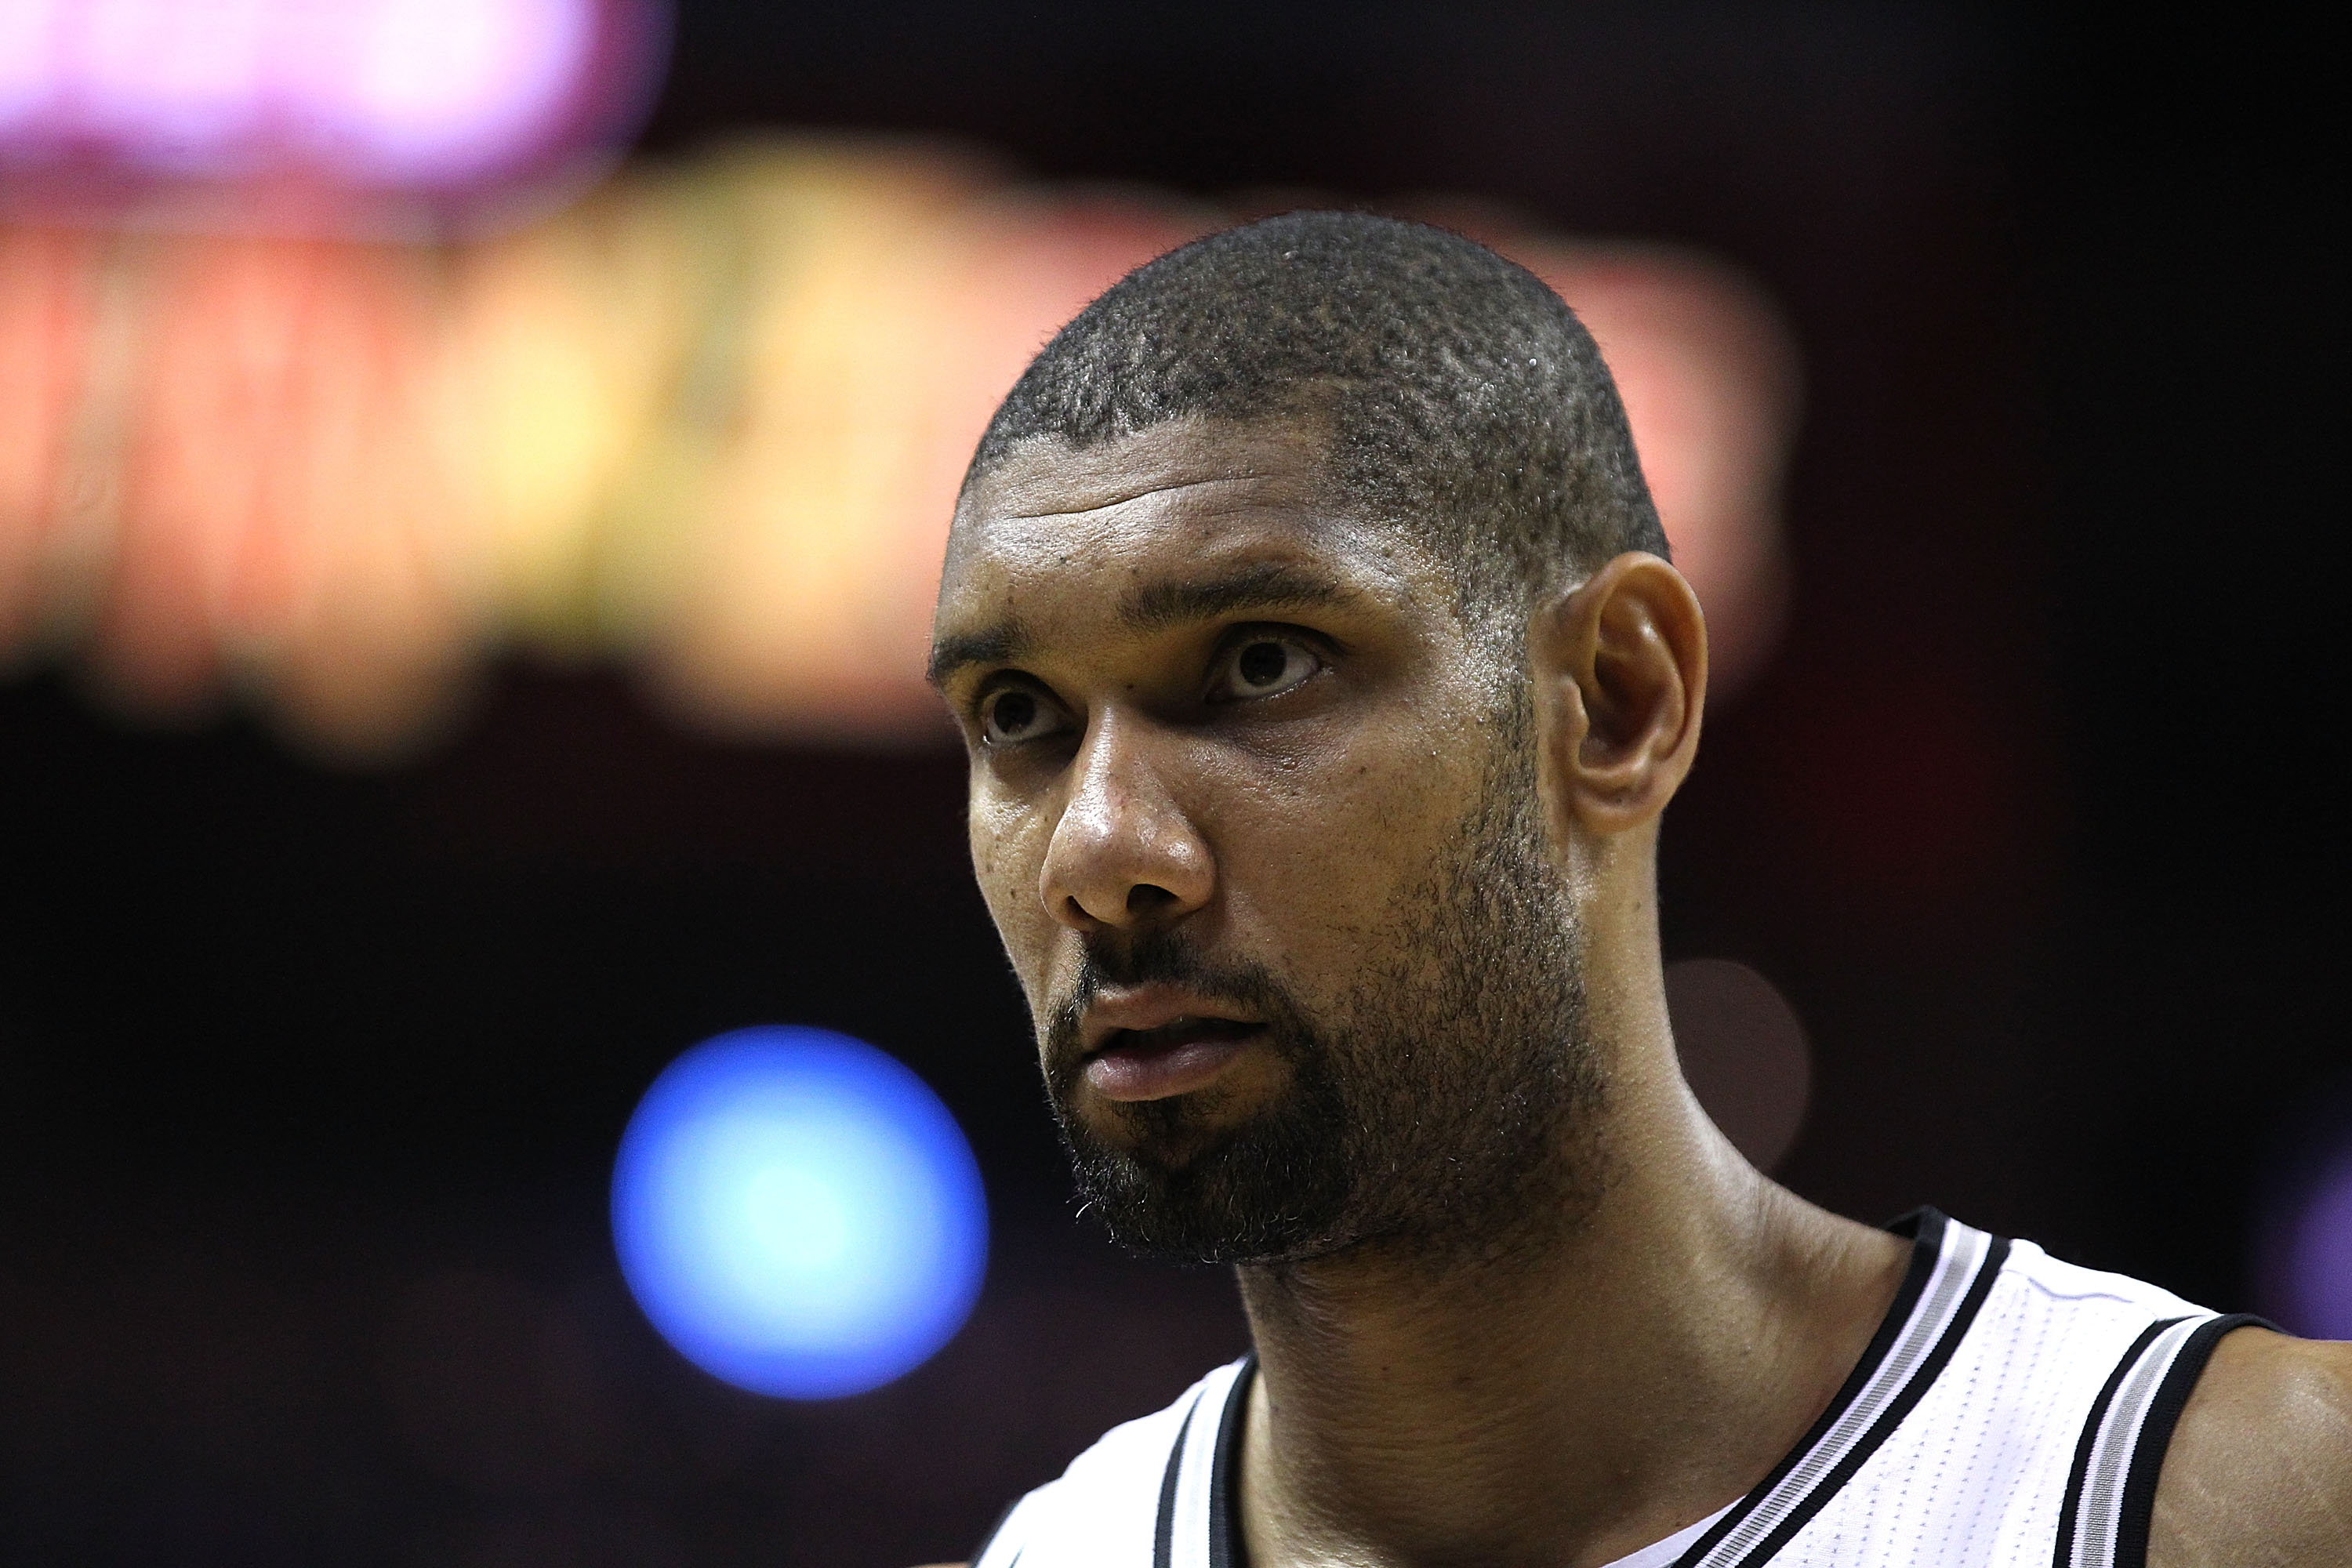 SAN ANTONIO, TX - APRIL 27:  Tim Duncan #21 of the San Antionio Spurs looks on against the Memphis Grizzlies in Game Five of the Western Conference Quarterfinals in the 2011 NBA Playoffs on April 27, 2011 at AT&T Center in San Antonio, Texas. NOTE TO USER